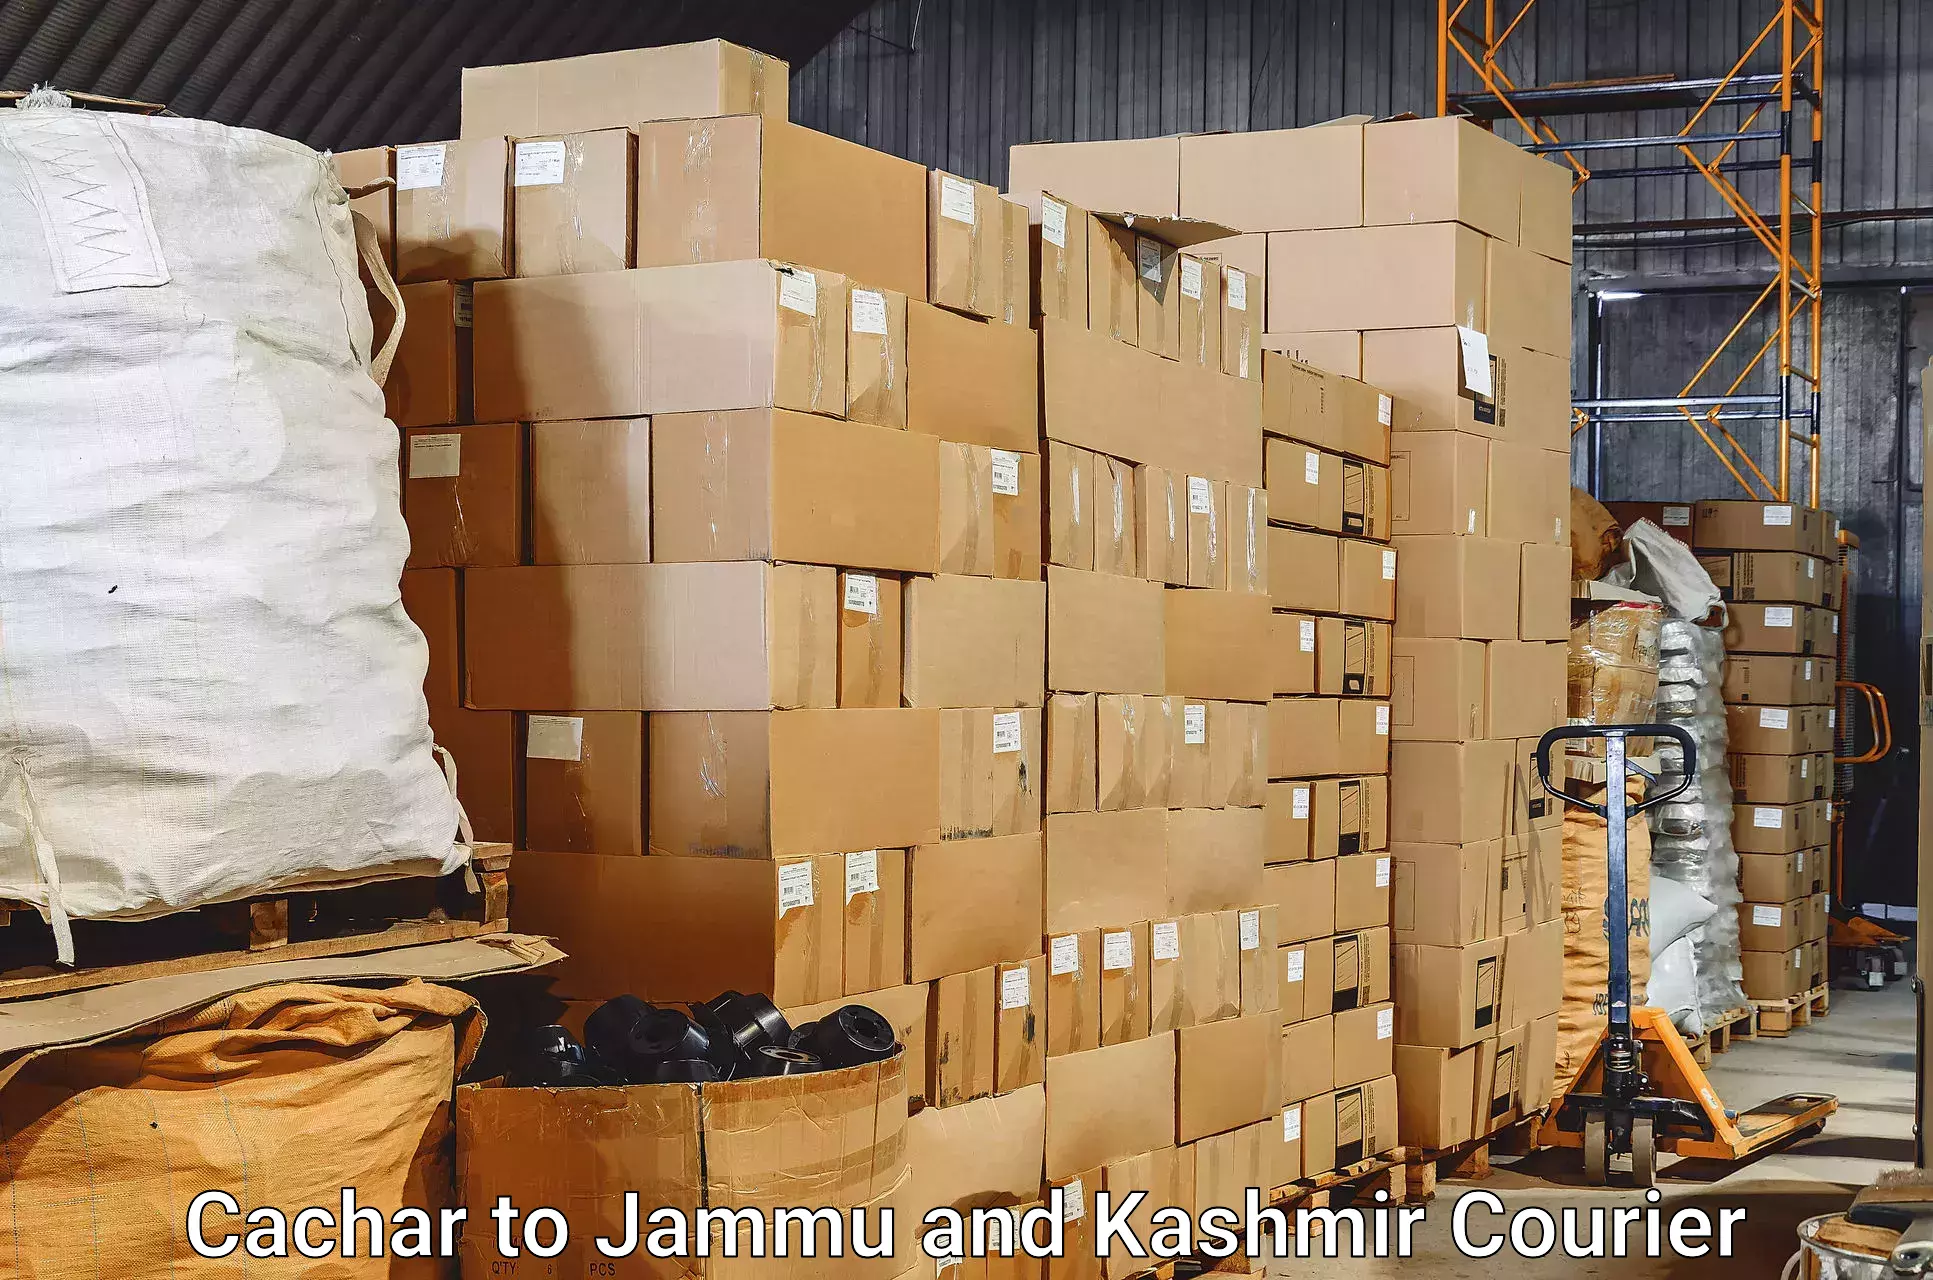 Luggage transport consultancy Cachar to Shopian